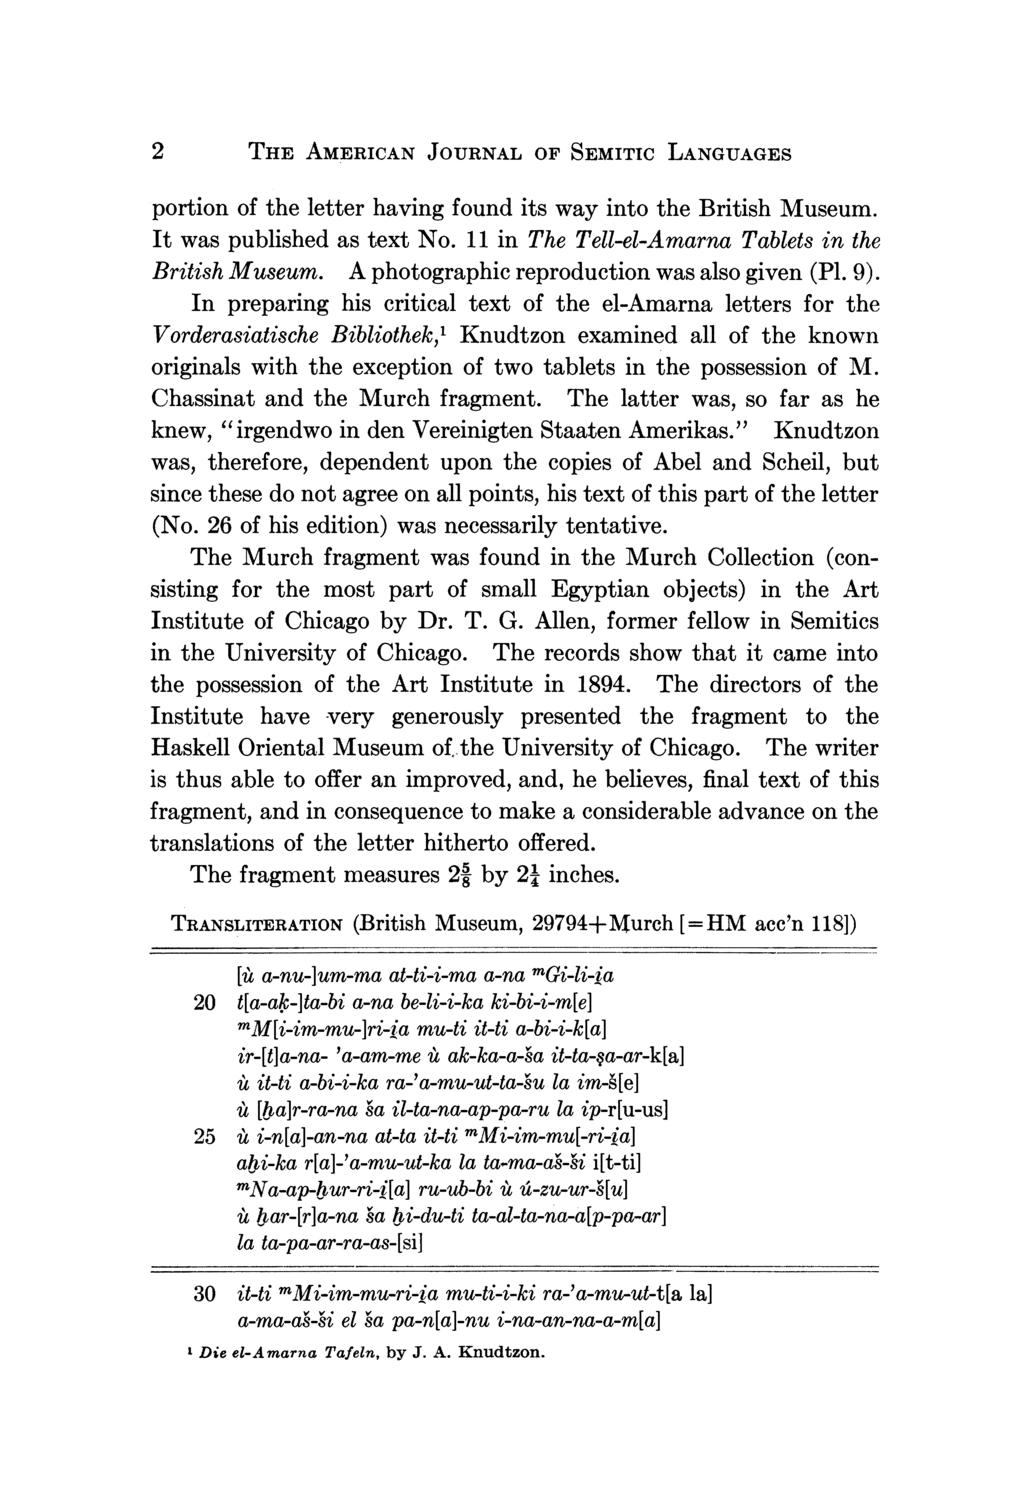 2 THE AMERICAN JOURNAL OF SEMITIC LANGUAGES portion of the letter having found its way into the British Museum. It was published as text No. 11 in The Tell-el-Amarna Tablets in the British Museum.